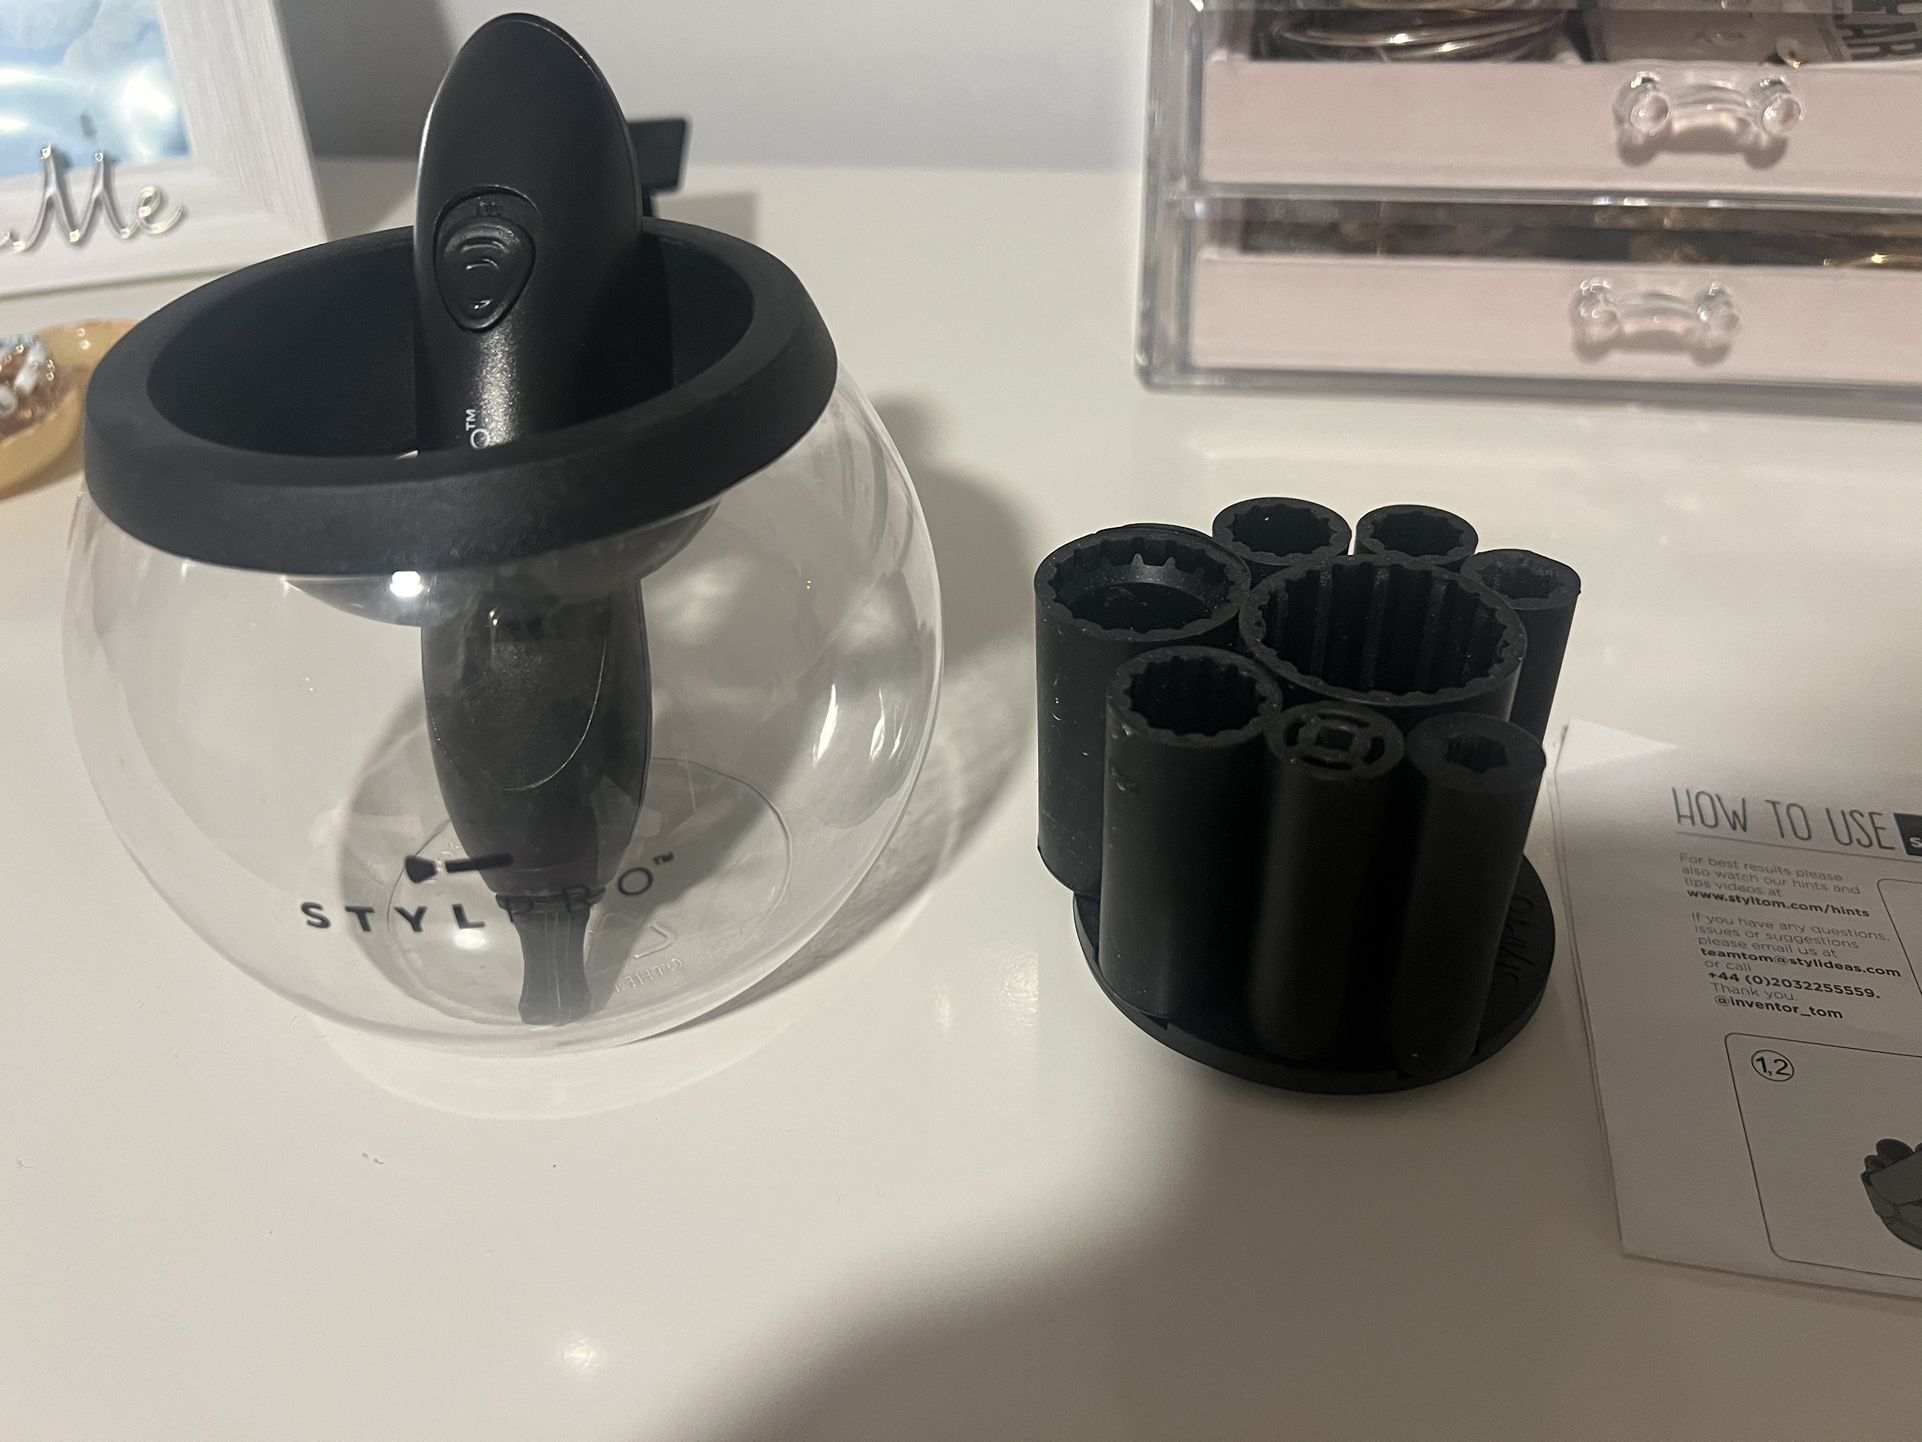 StylPro Makeup Brush Cleaner